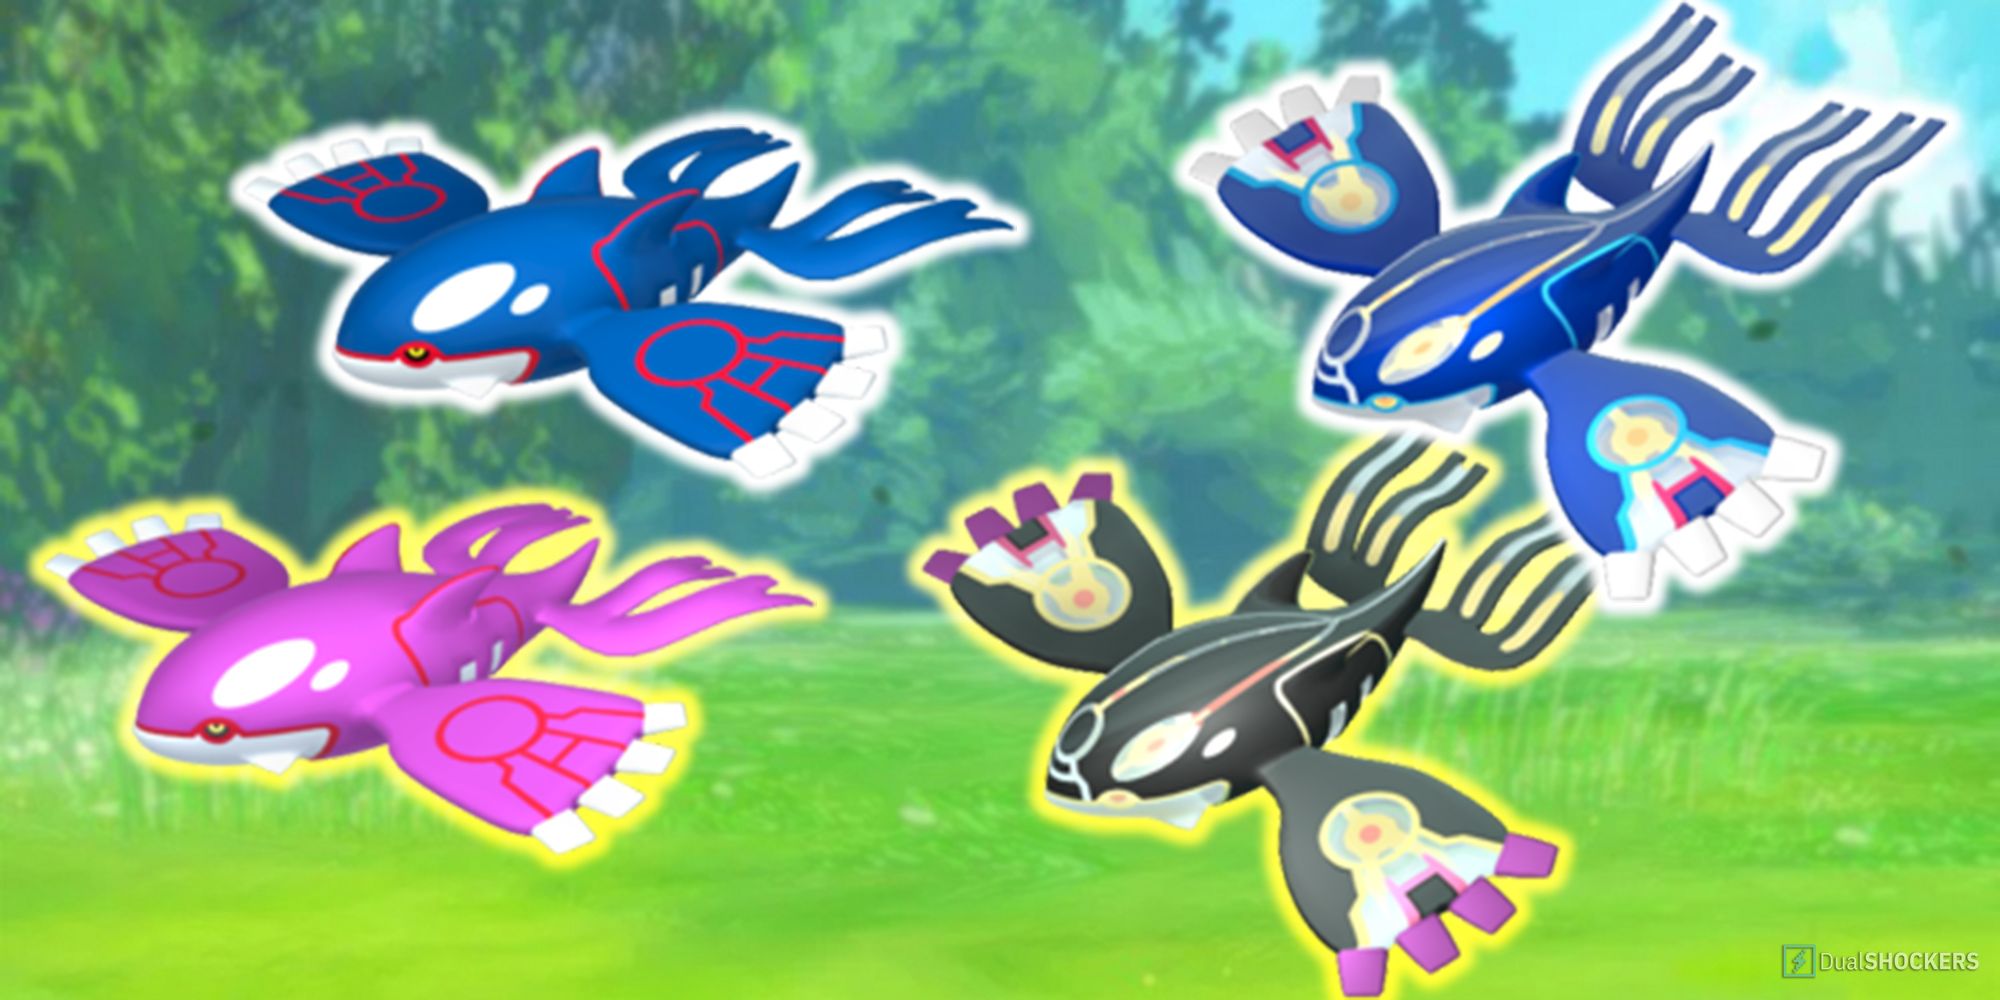 Kyogre and Primal Kyogre with their shiny variants in Pokemon GO.